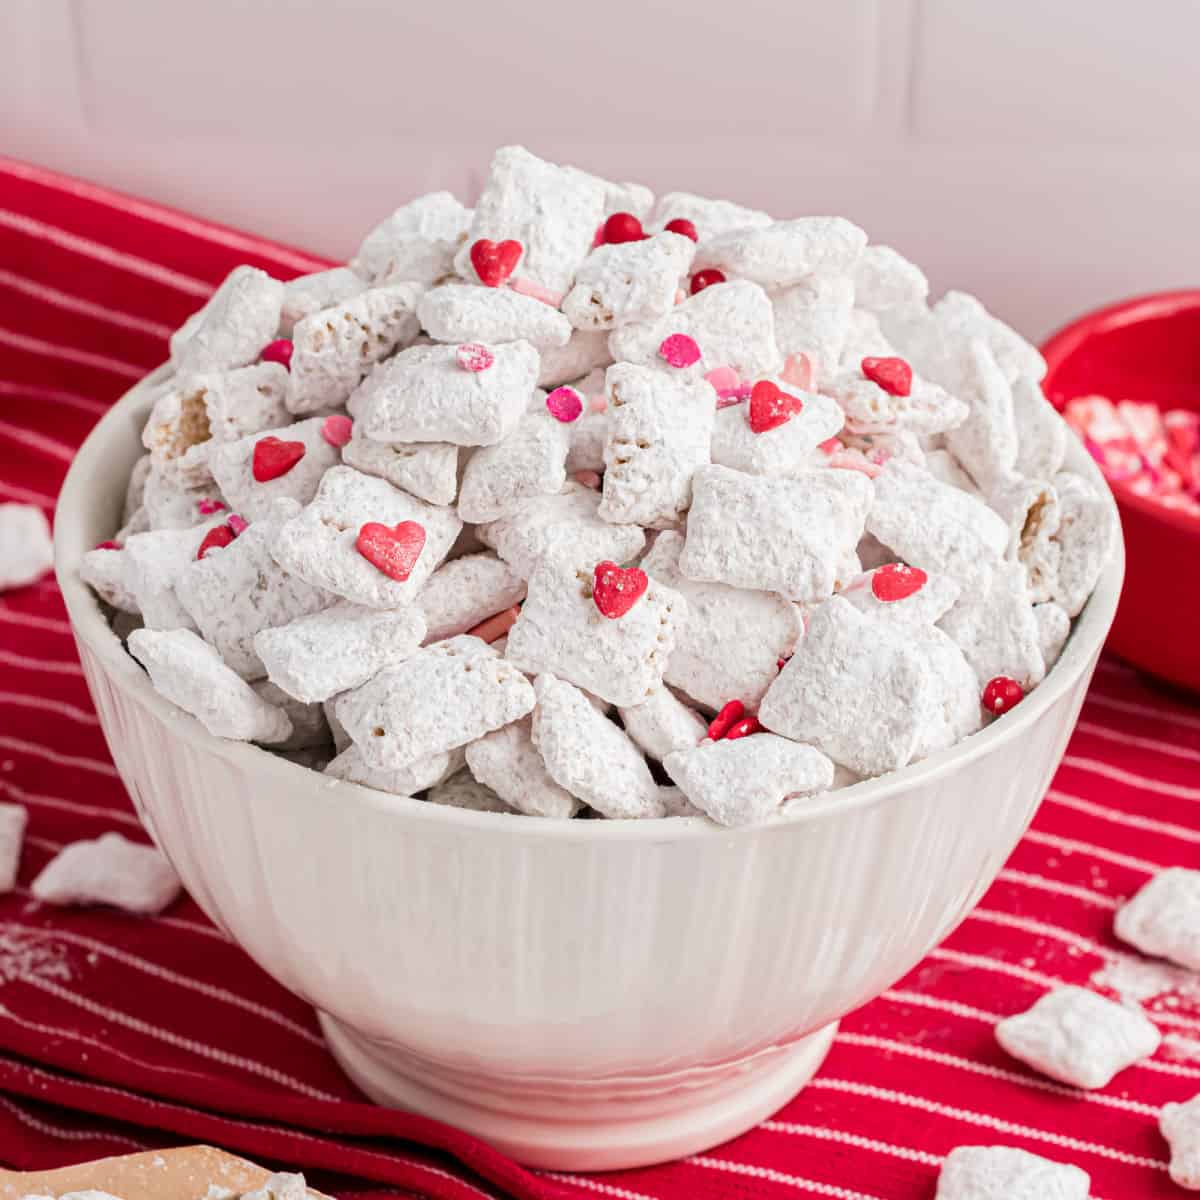 Cherry puppy chow with sprinkles in a white serving bowl.